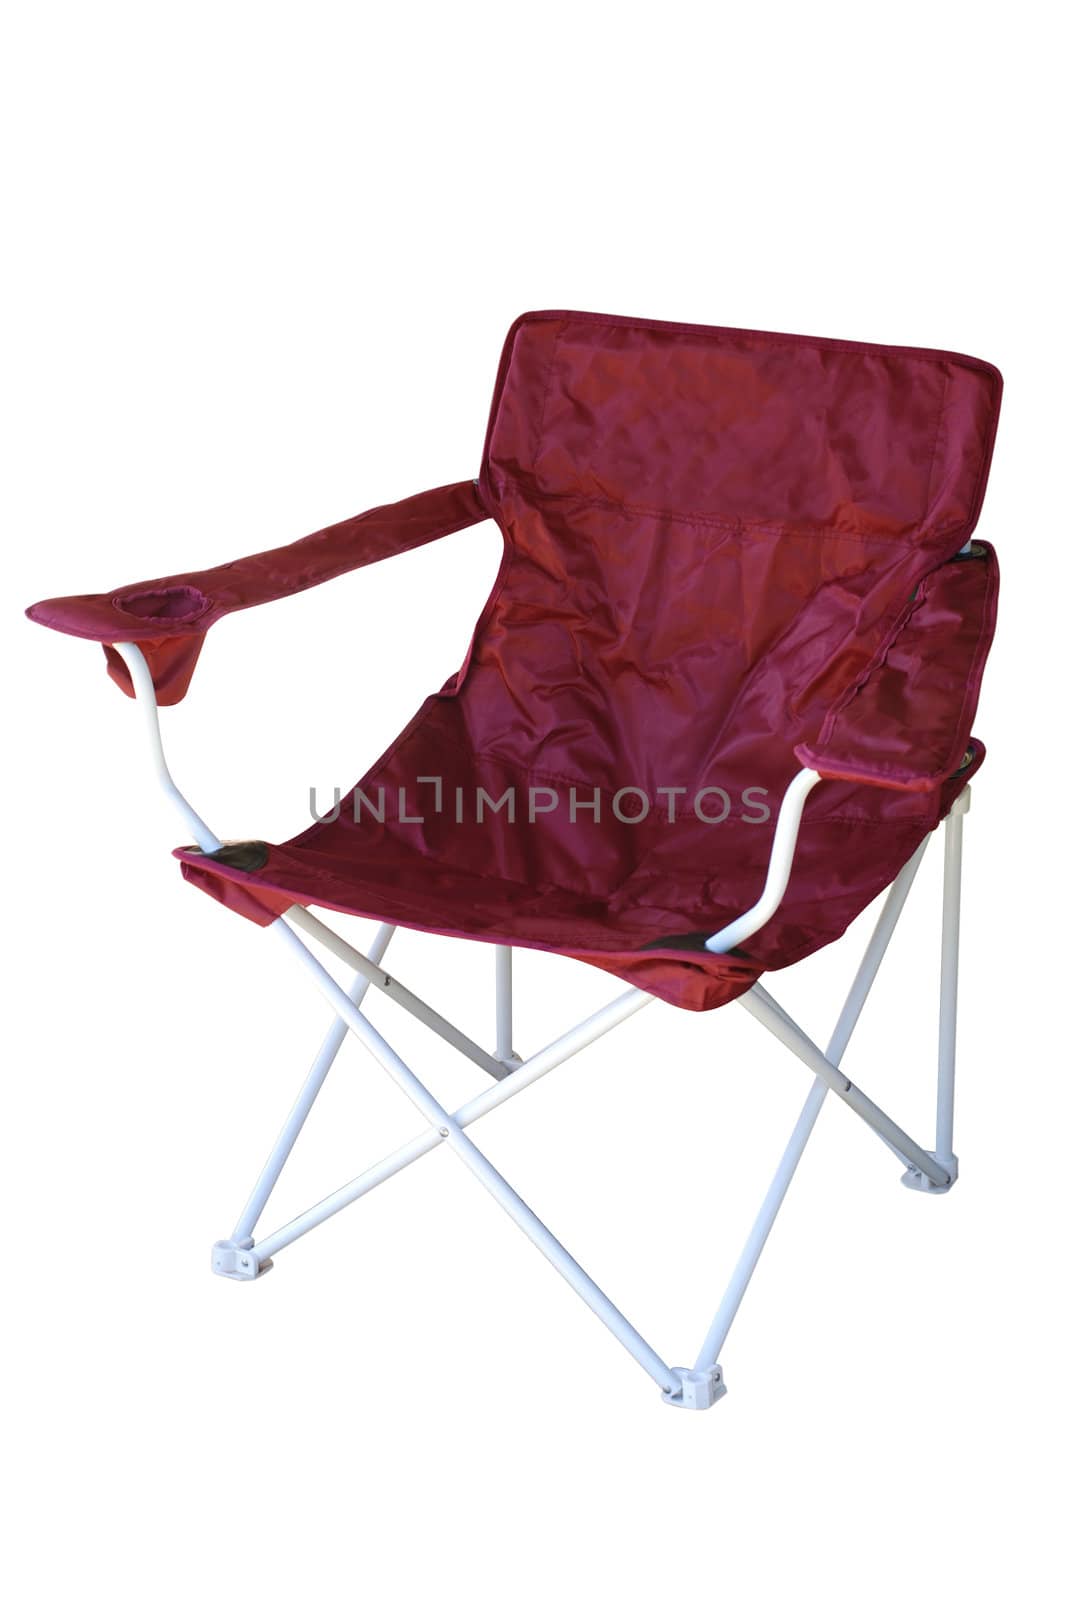 Tailgating Chair by dehooks